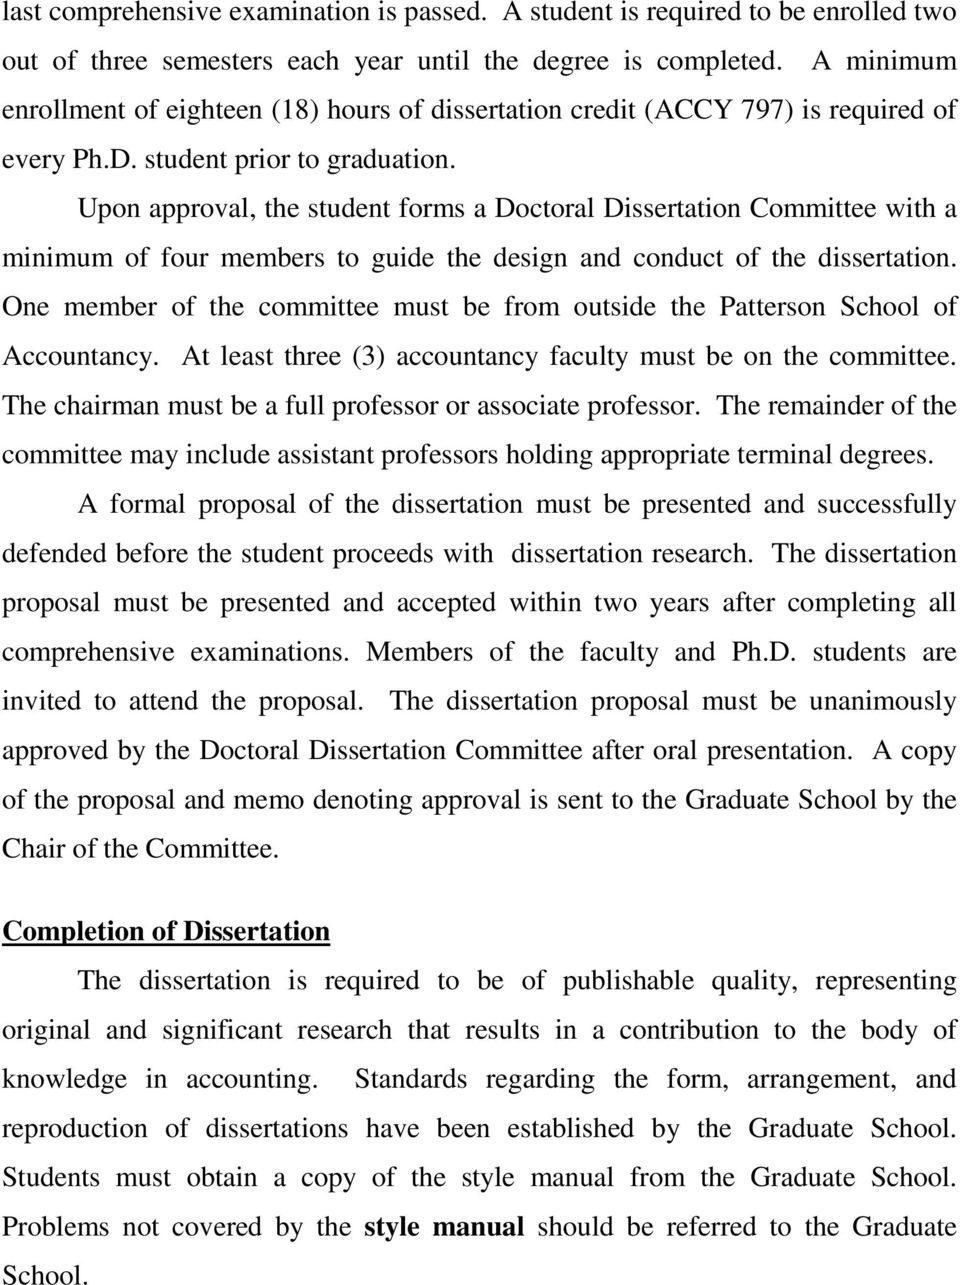 Upon approval, the student forms a Doctoral Dissertation Committee with a minimum of four members to guide the design and conduct of the dissertation.